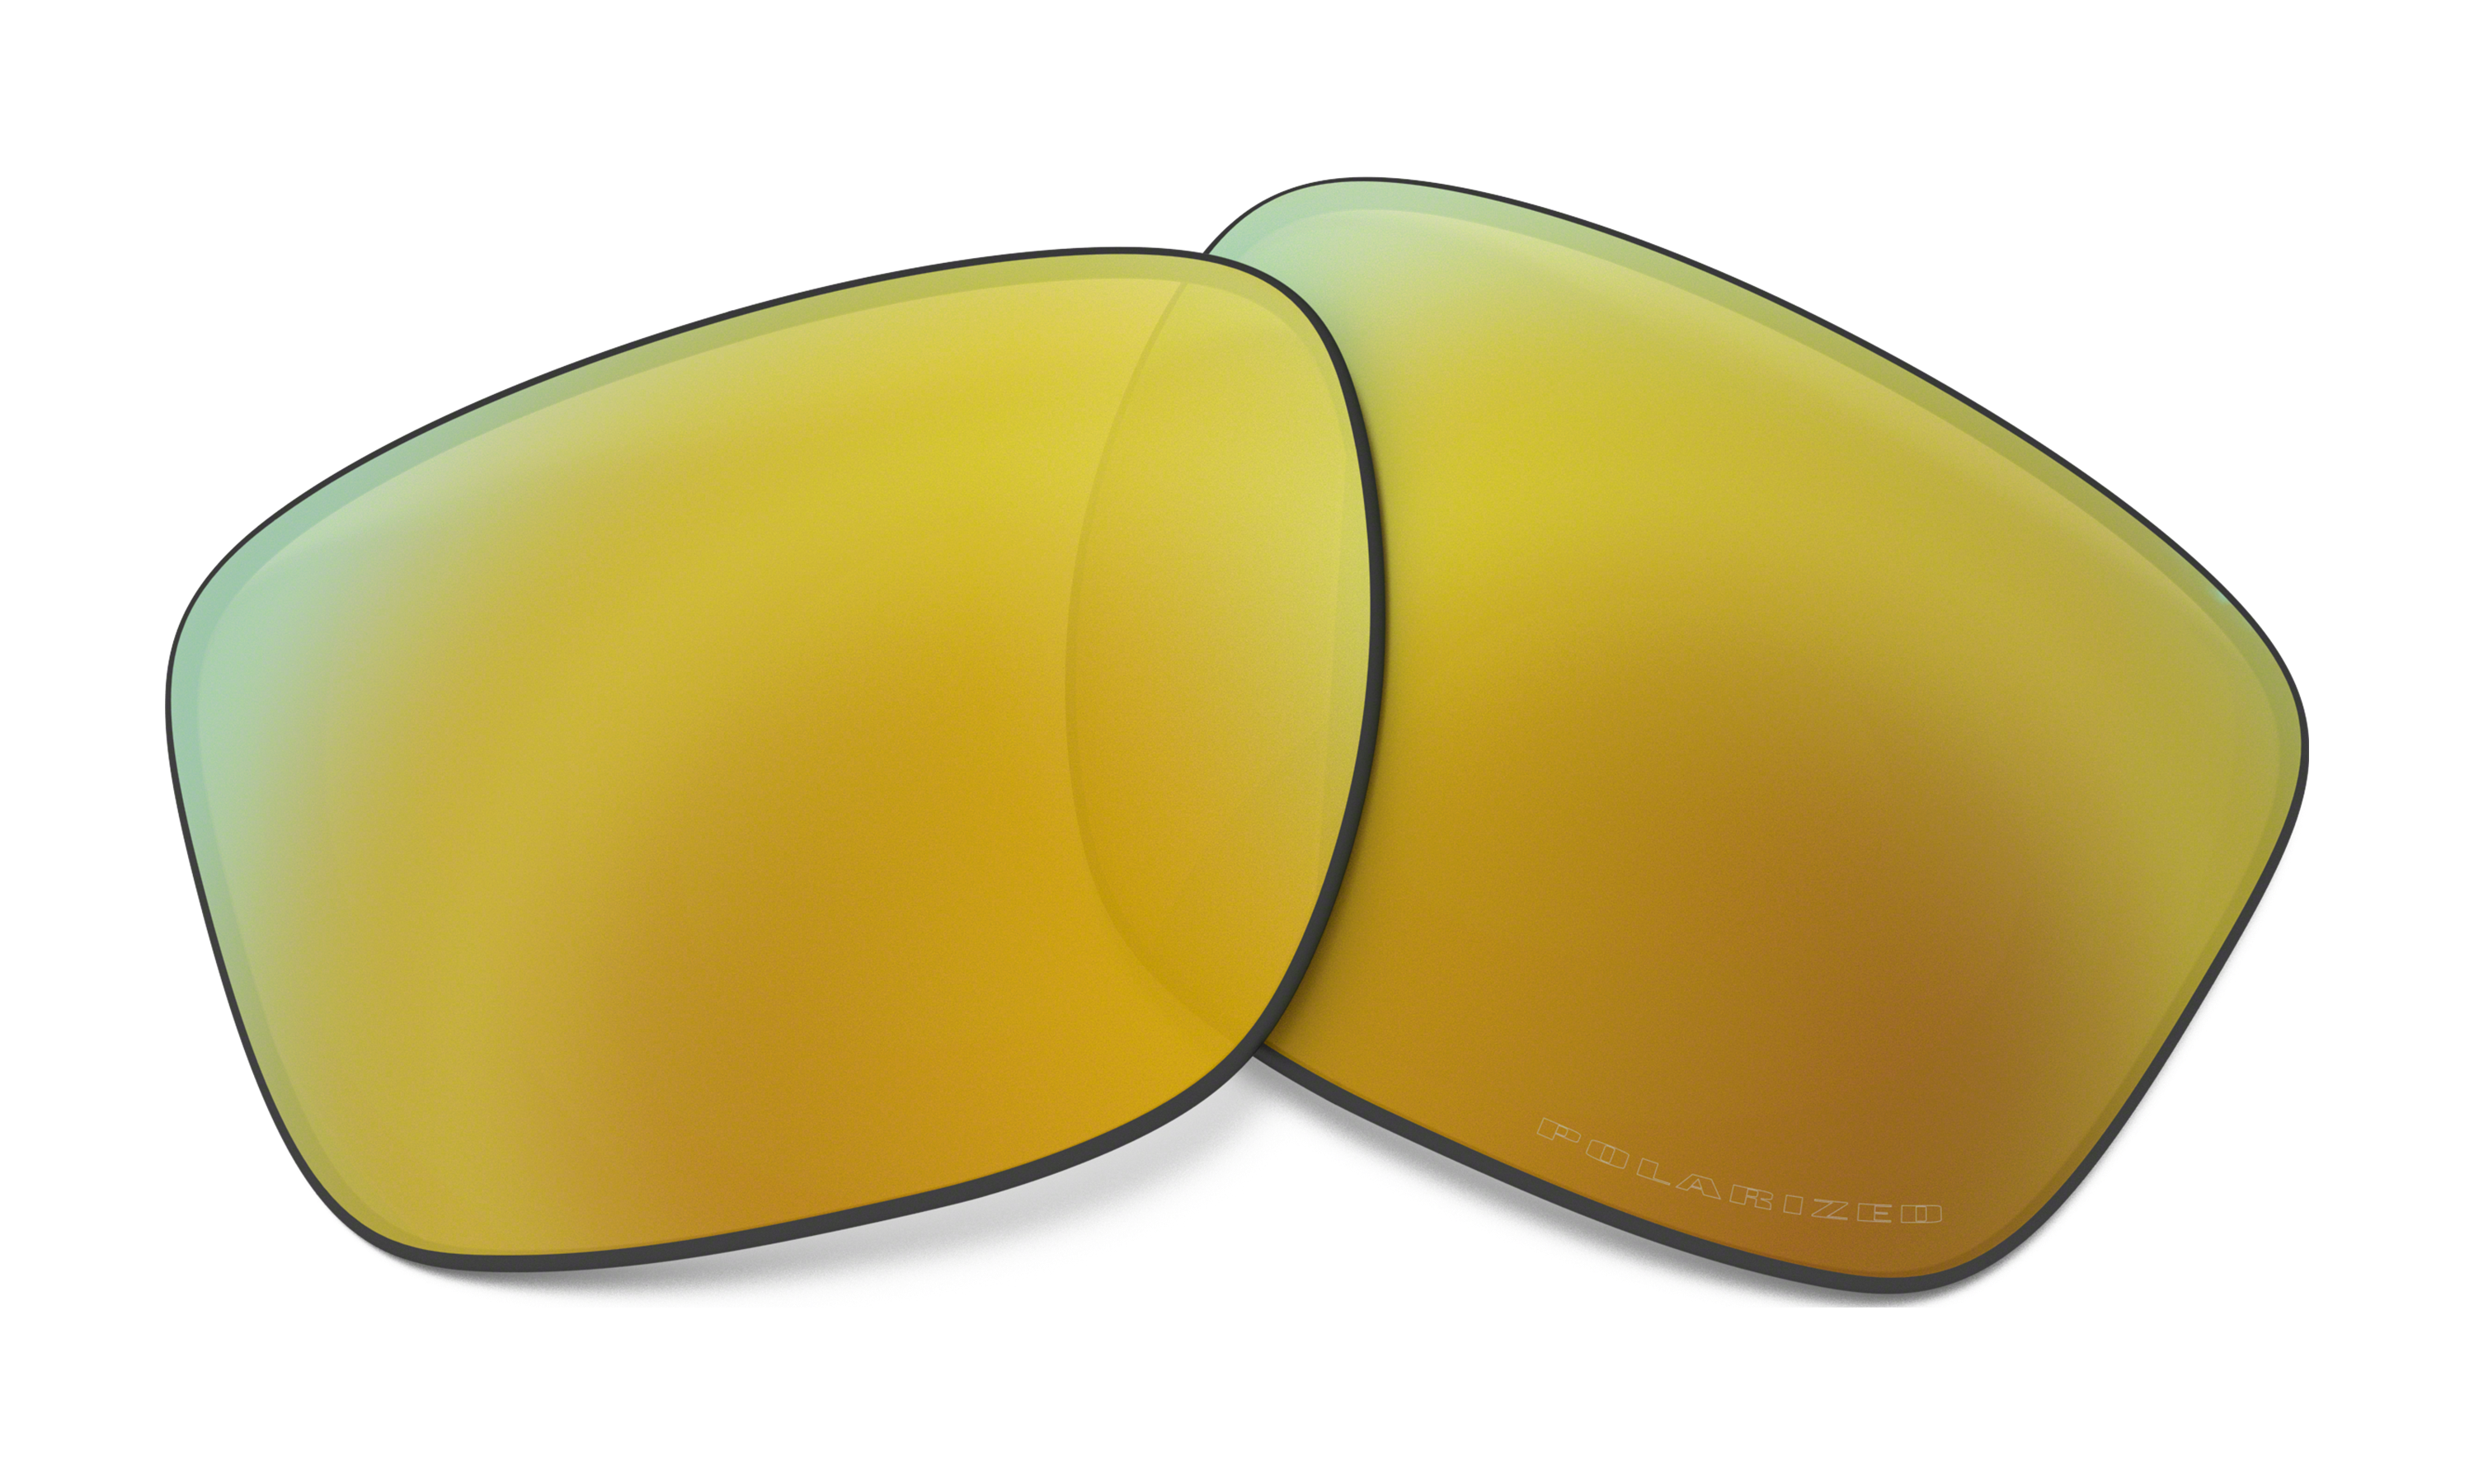 oakley sliver r replacement lenses